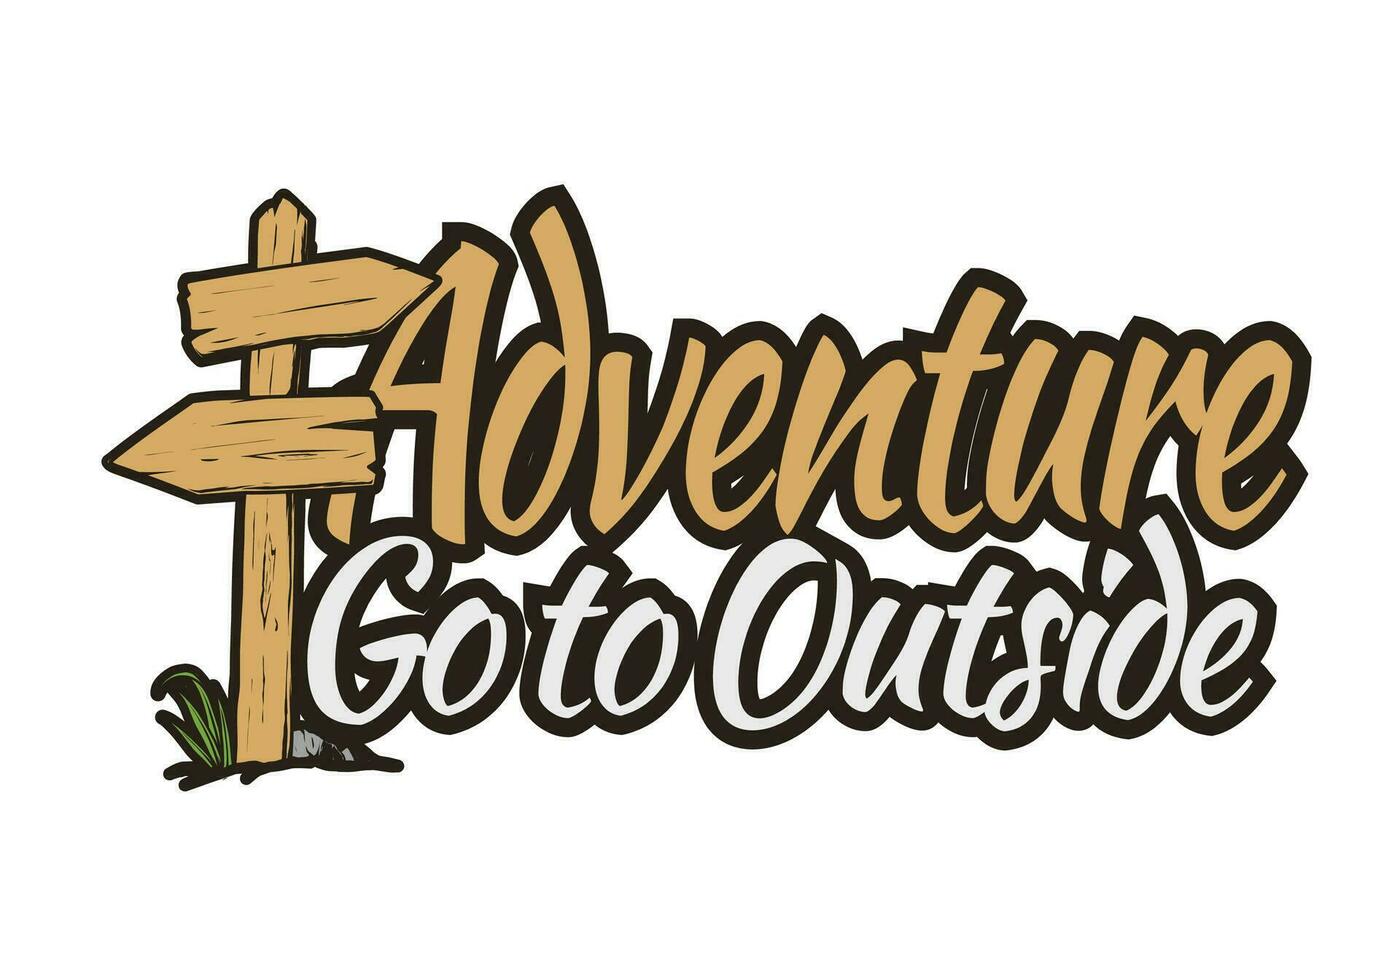 Adventure design with wooden guide sign illustration vector